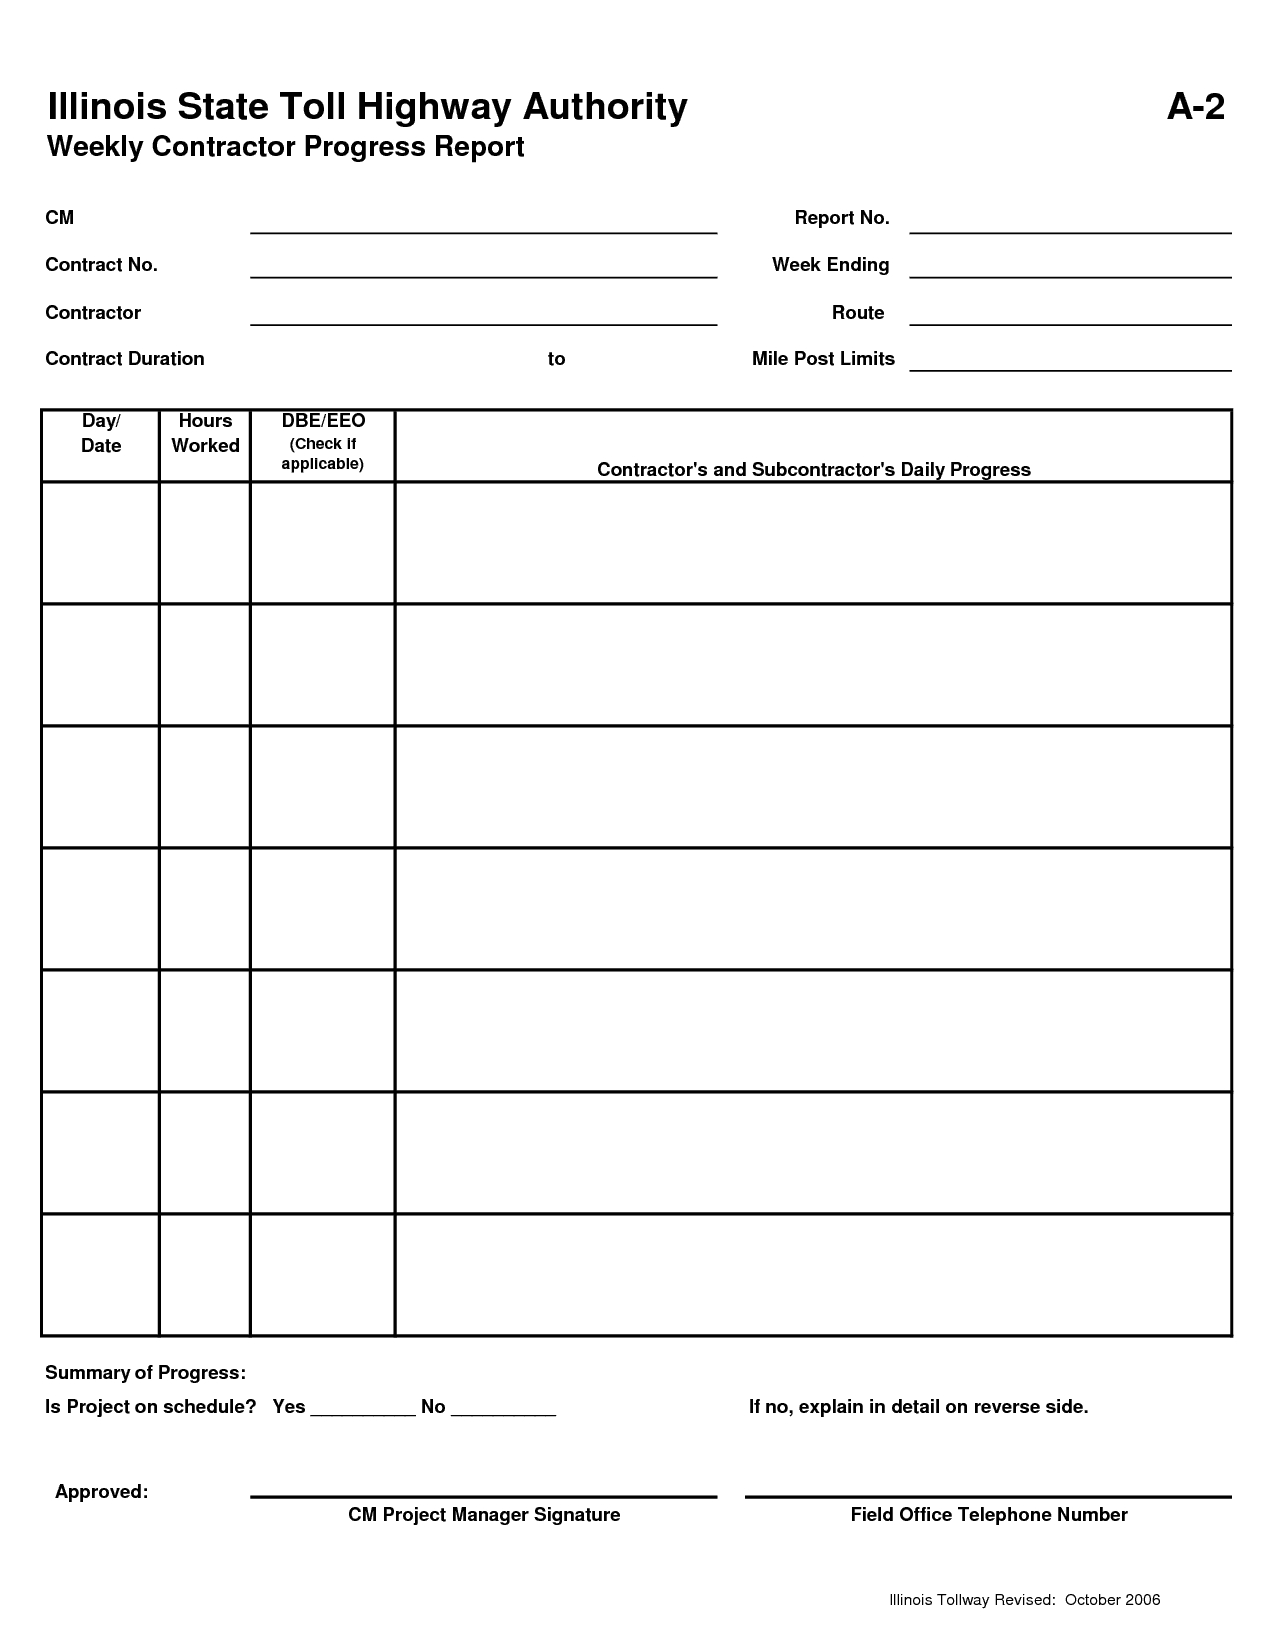 Bookkeeping Eadsheet For Small Business And Gas Station For Eeo 1 Report Template